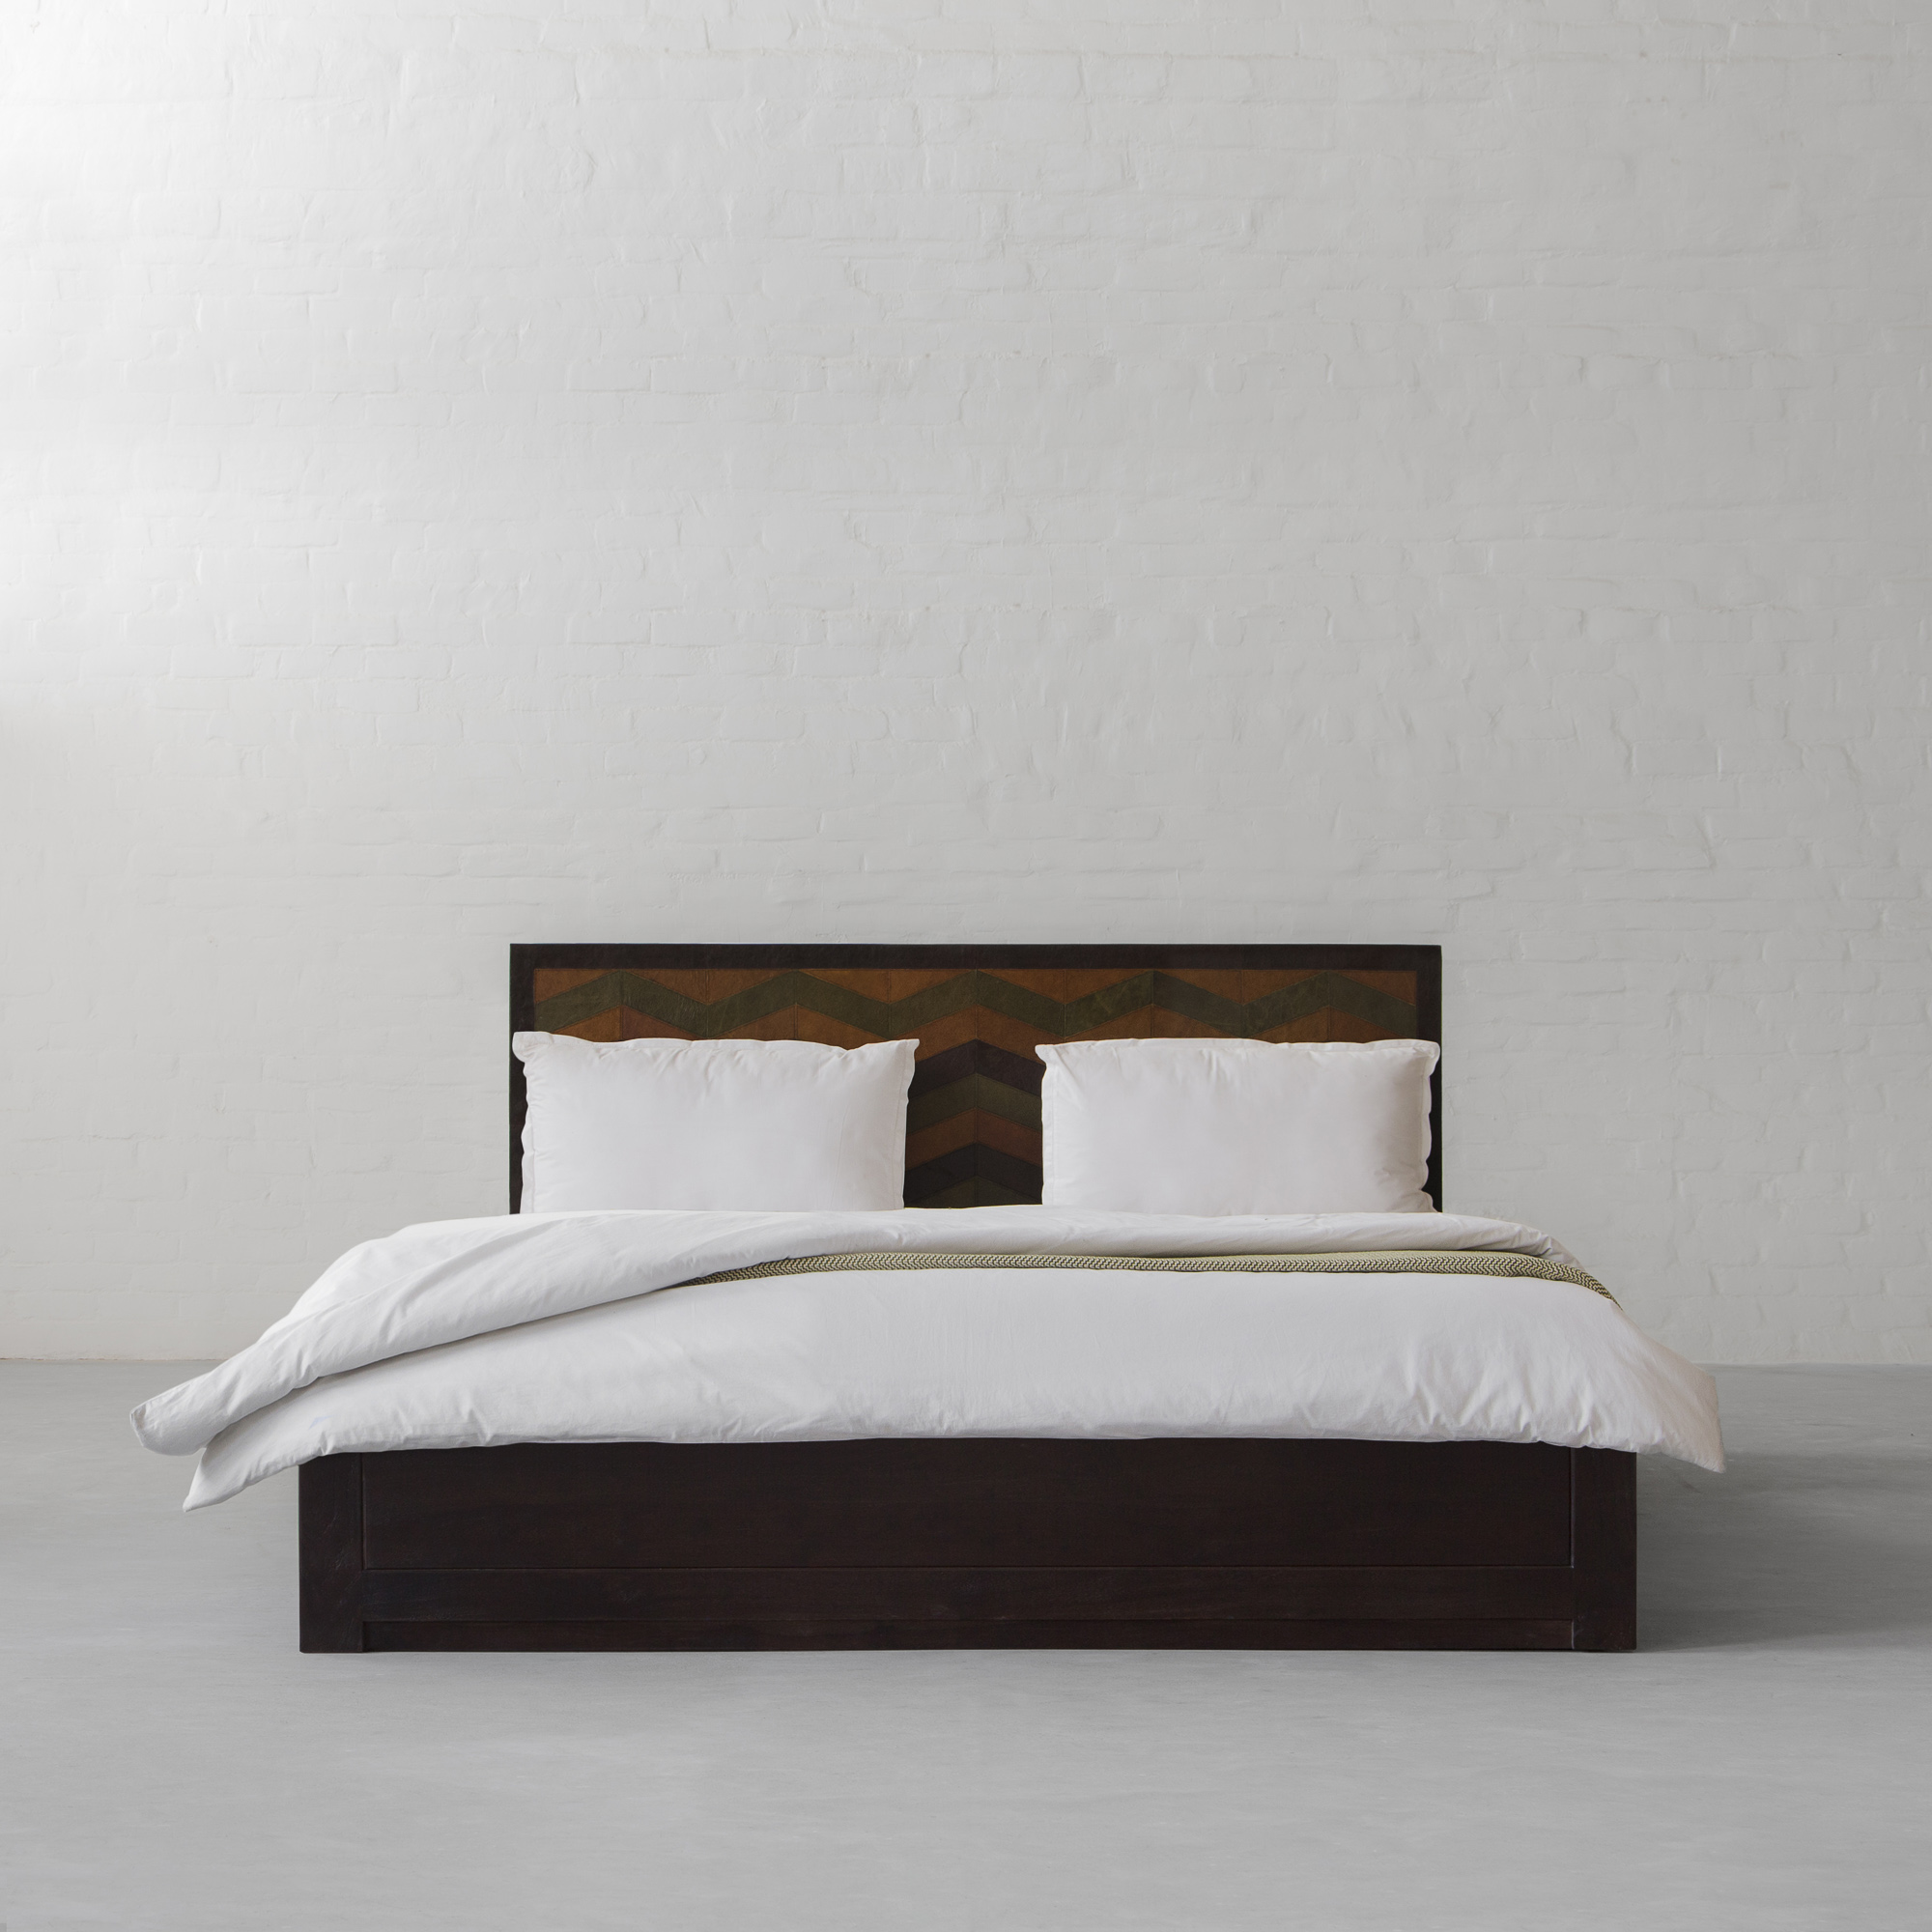 EDWARD BED COLLECTION